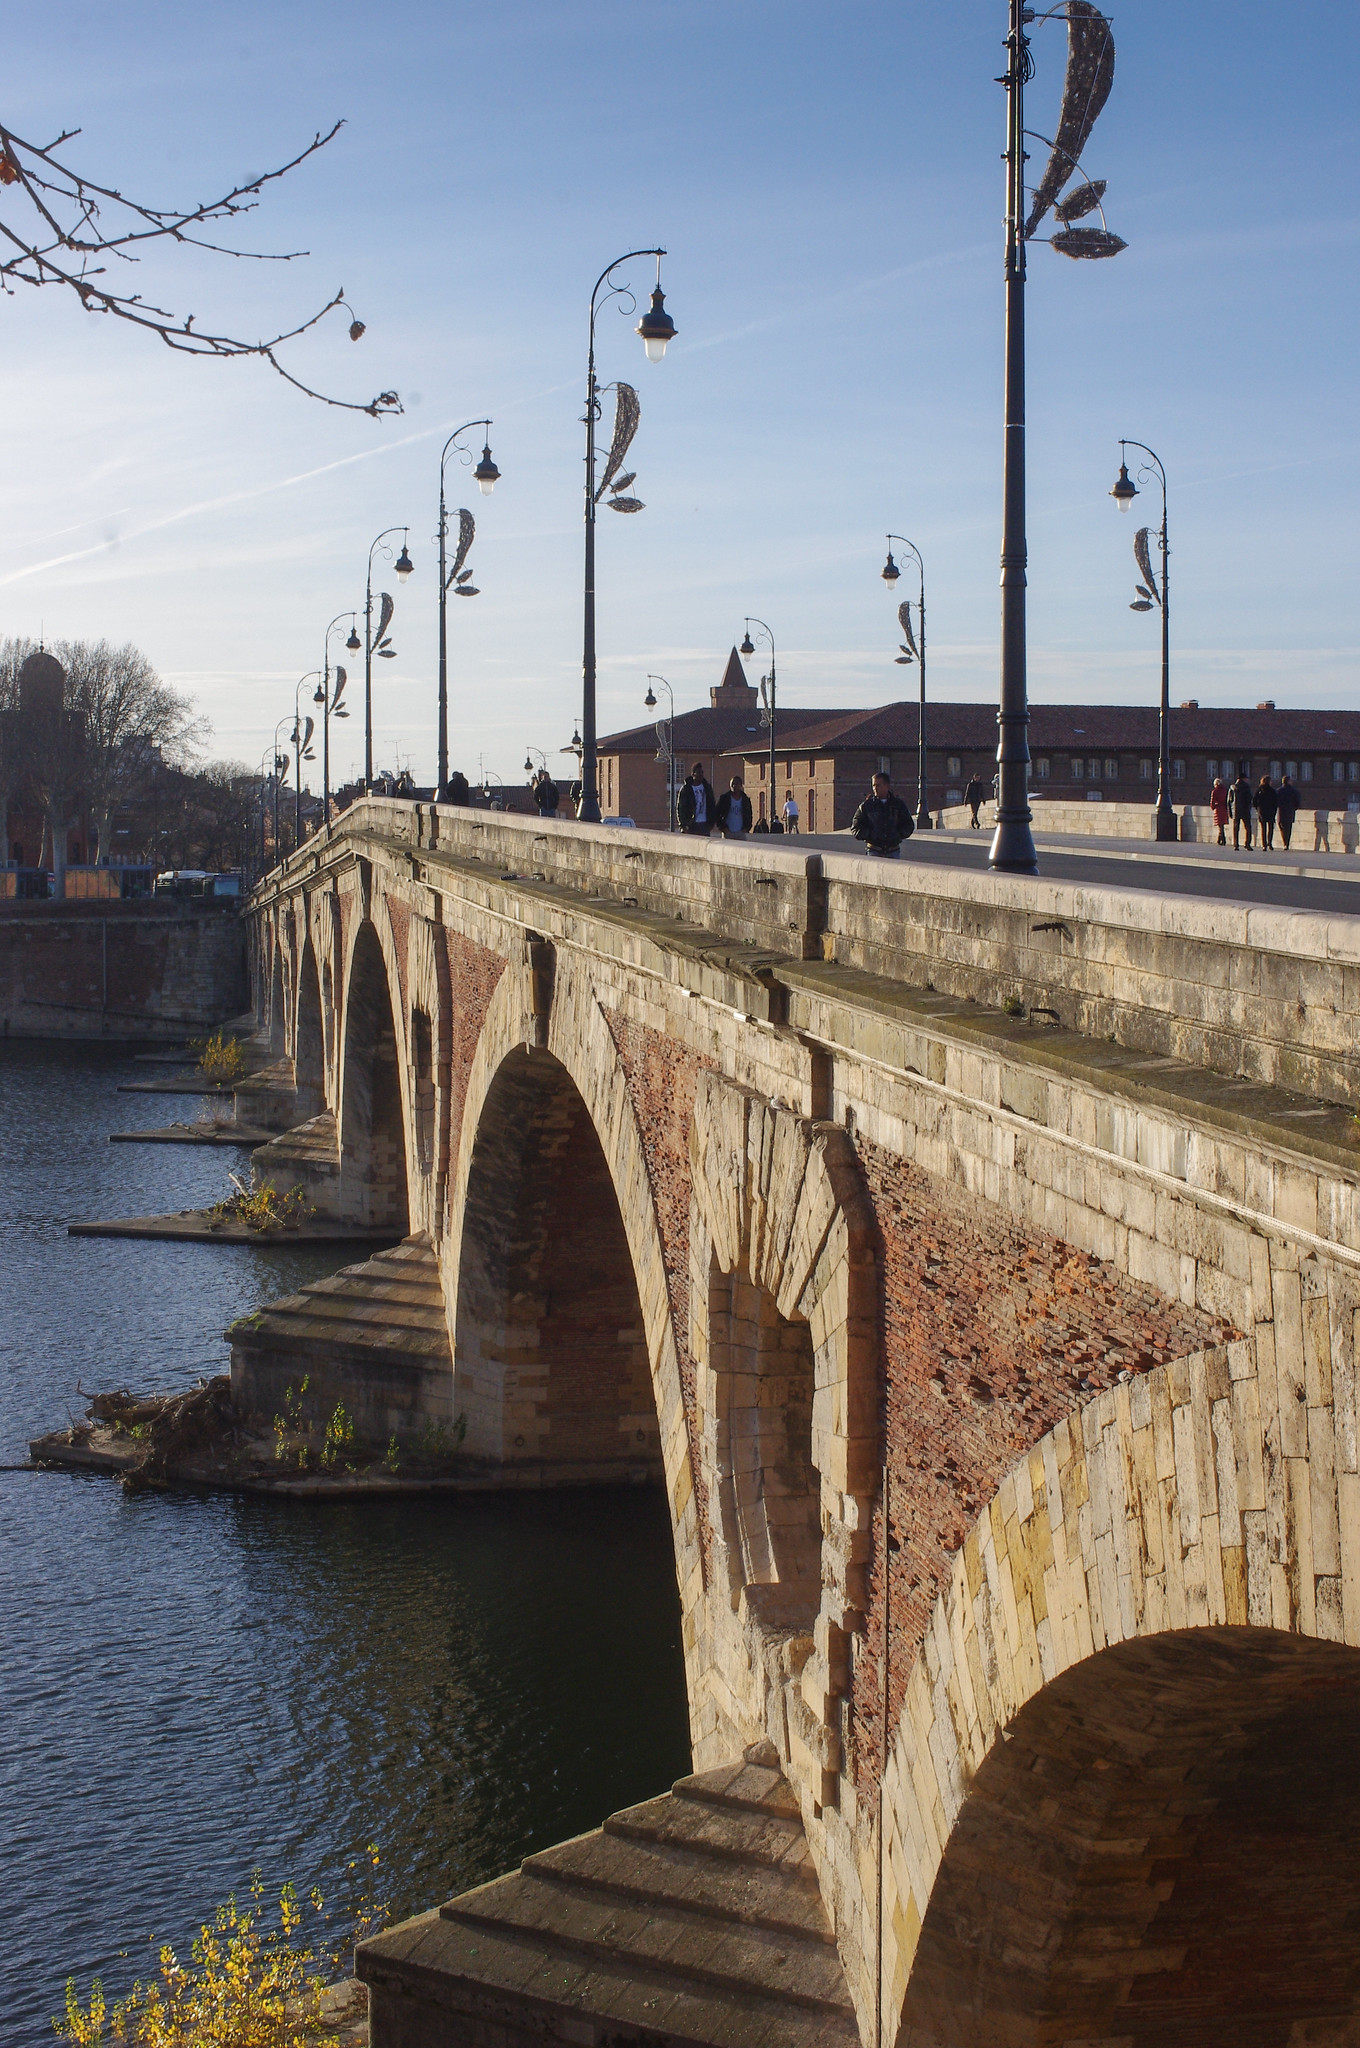 38 vibrant photos of Pont Neuf, Toulouse in France | BOOMSbeat